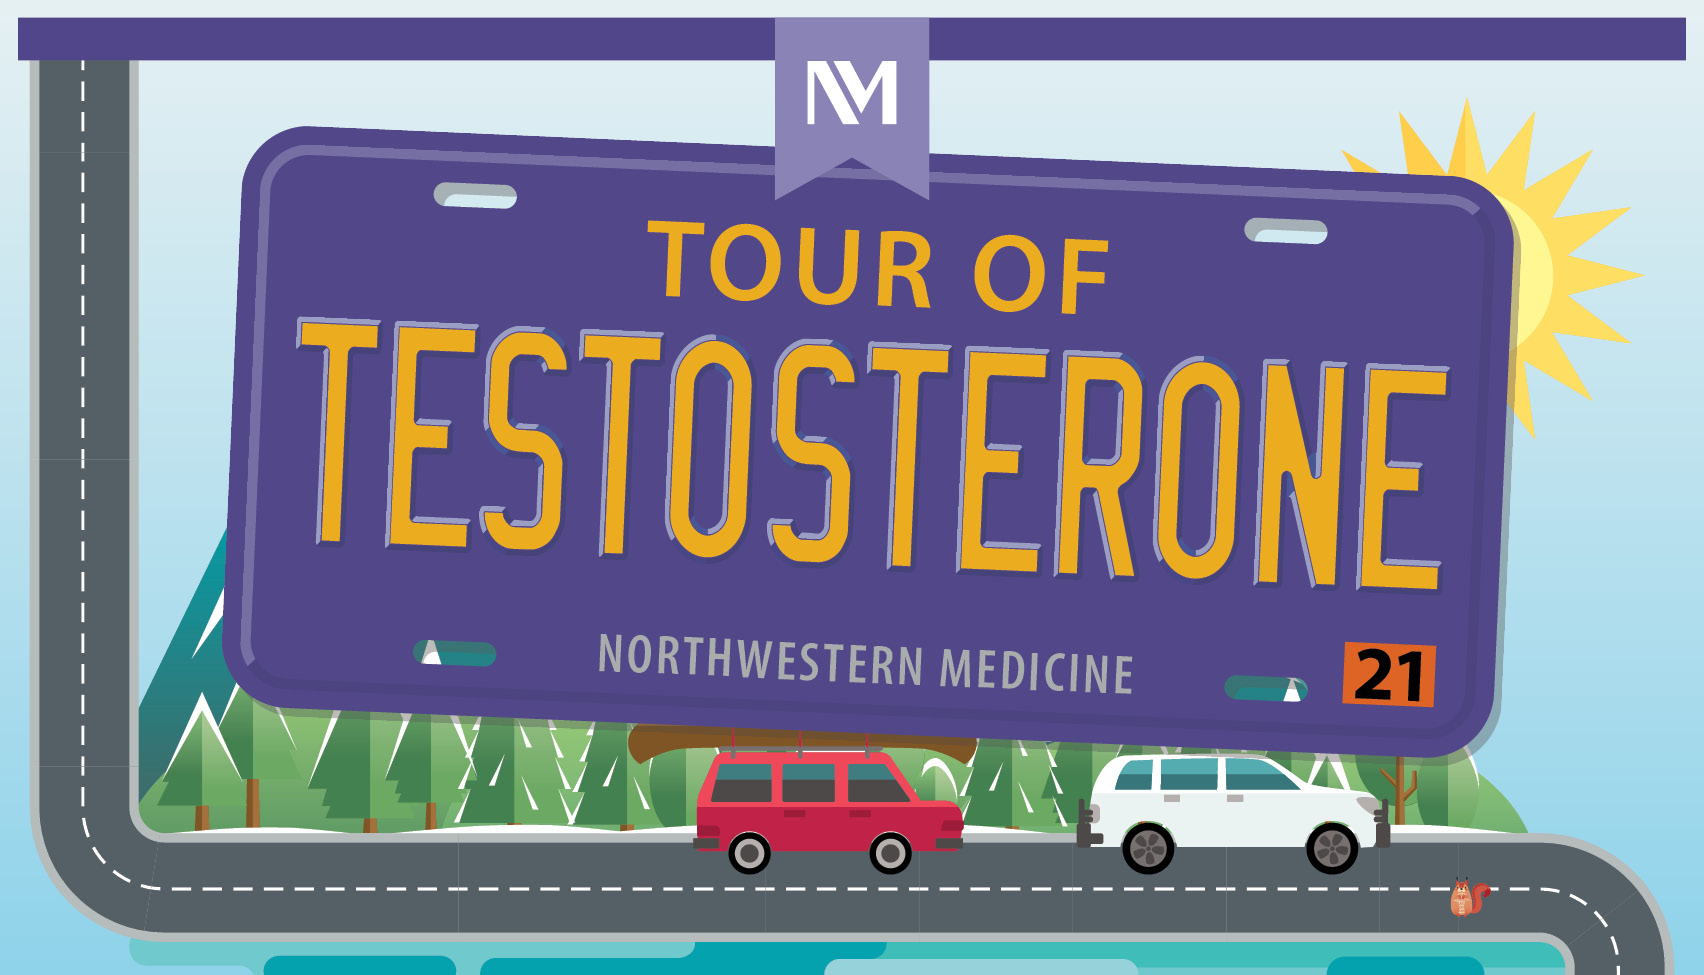 nm-tour-of-testosterone_preview